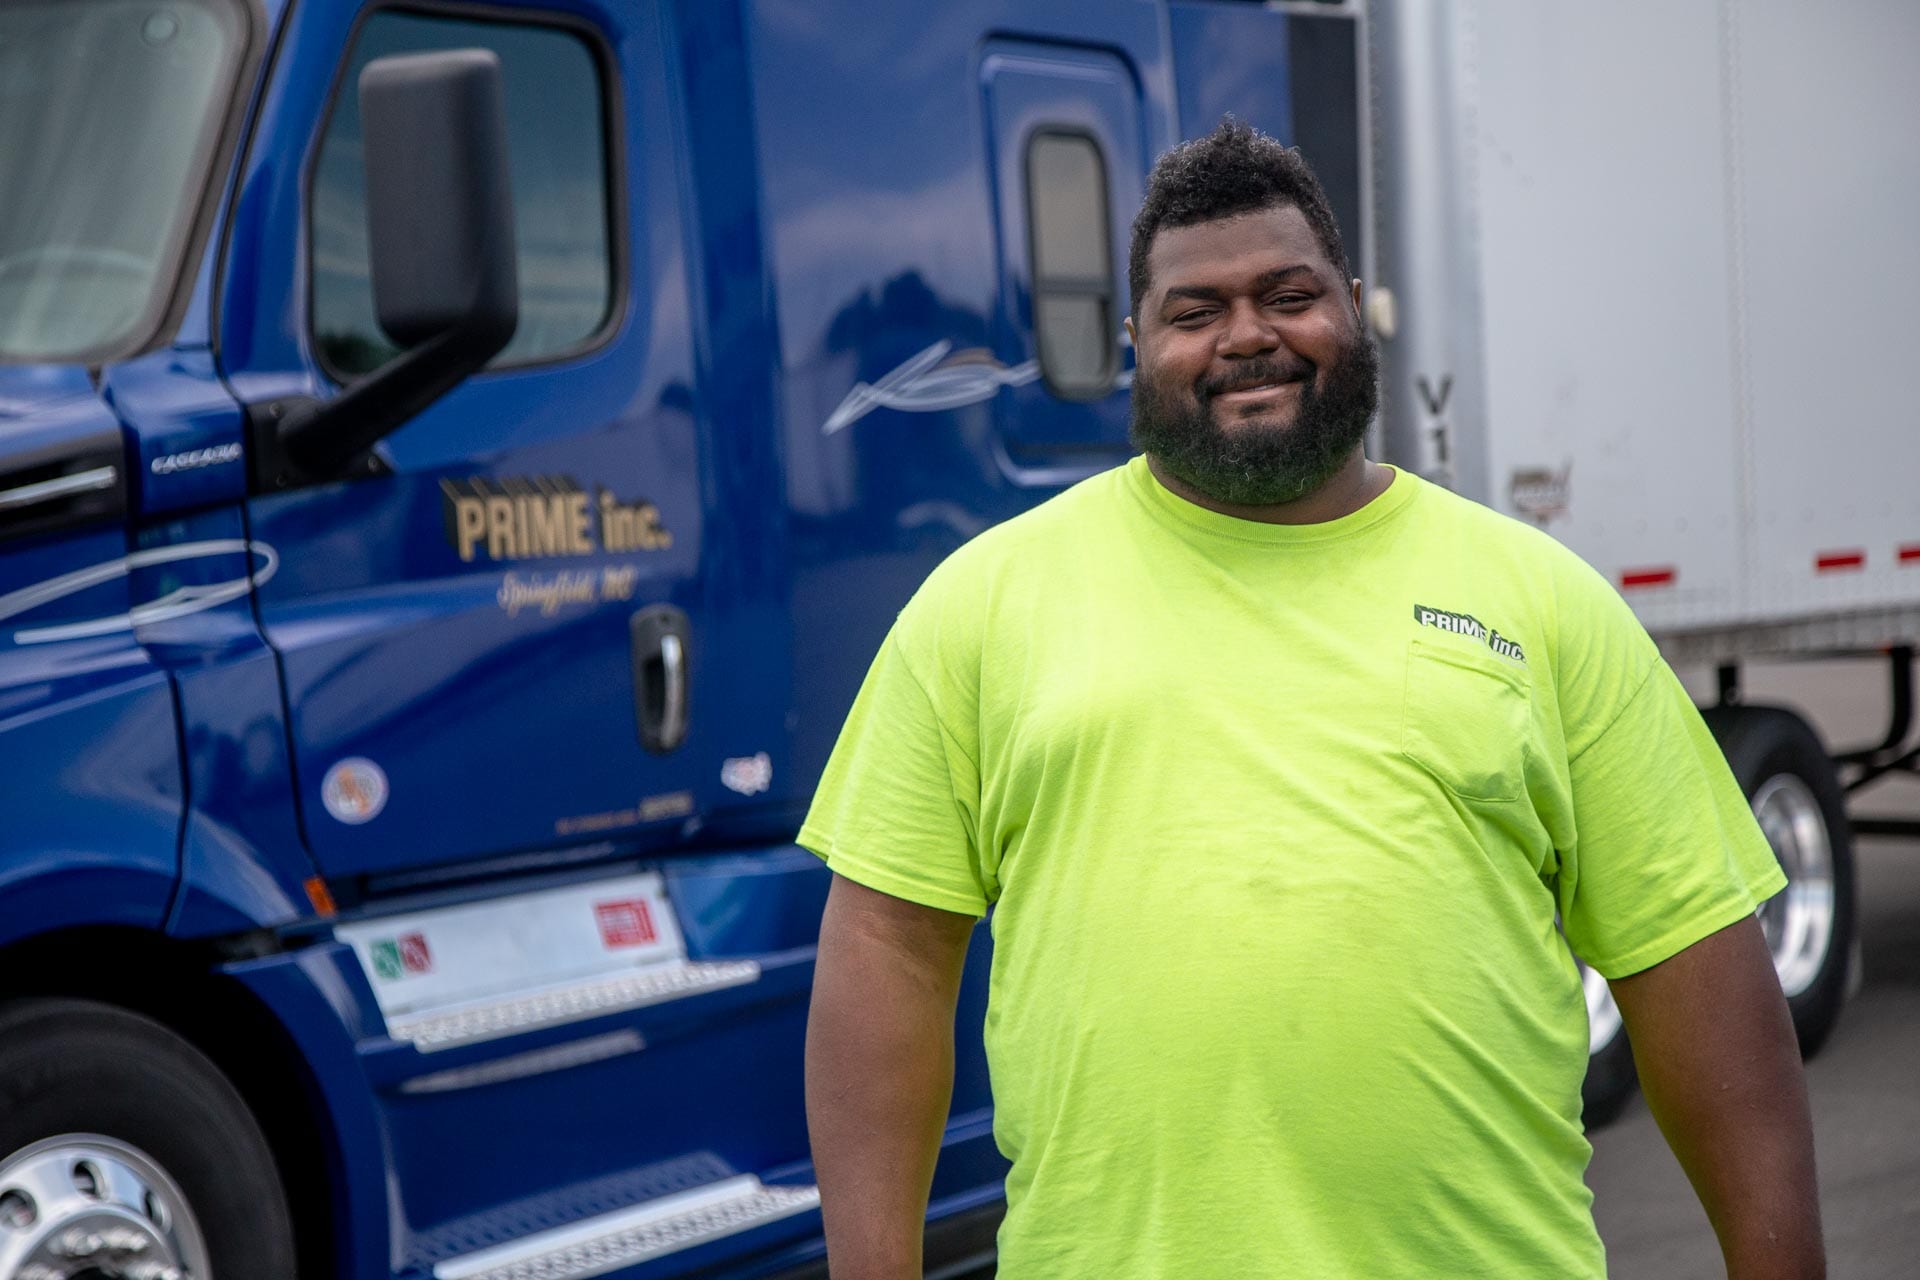 A Prime truck driver, wearing a safety yellow t-shirt, standing in front of a dark blue semi-truck.